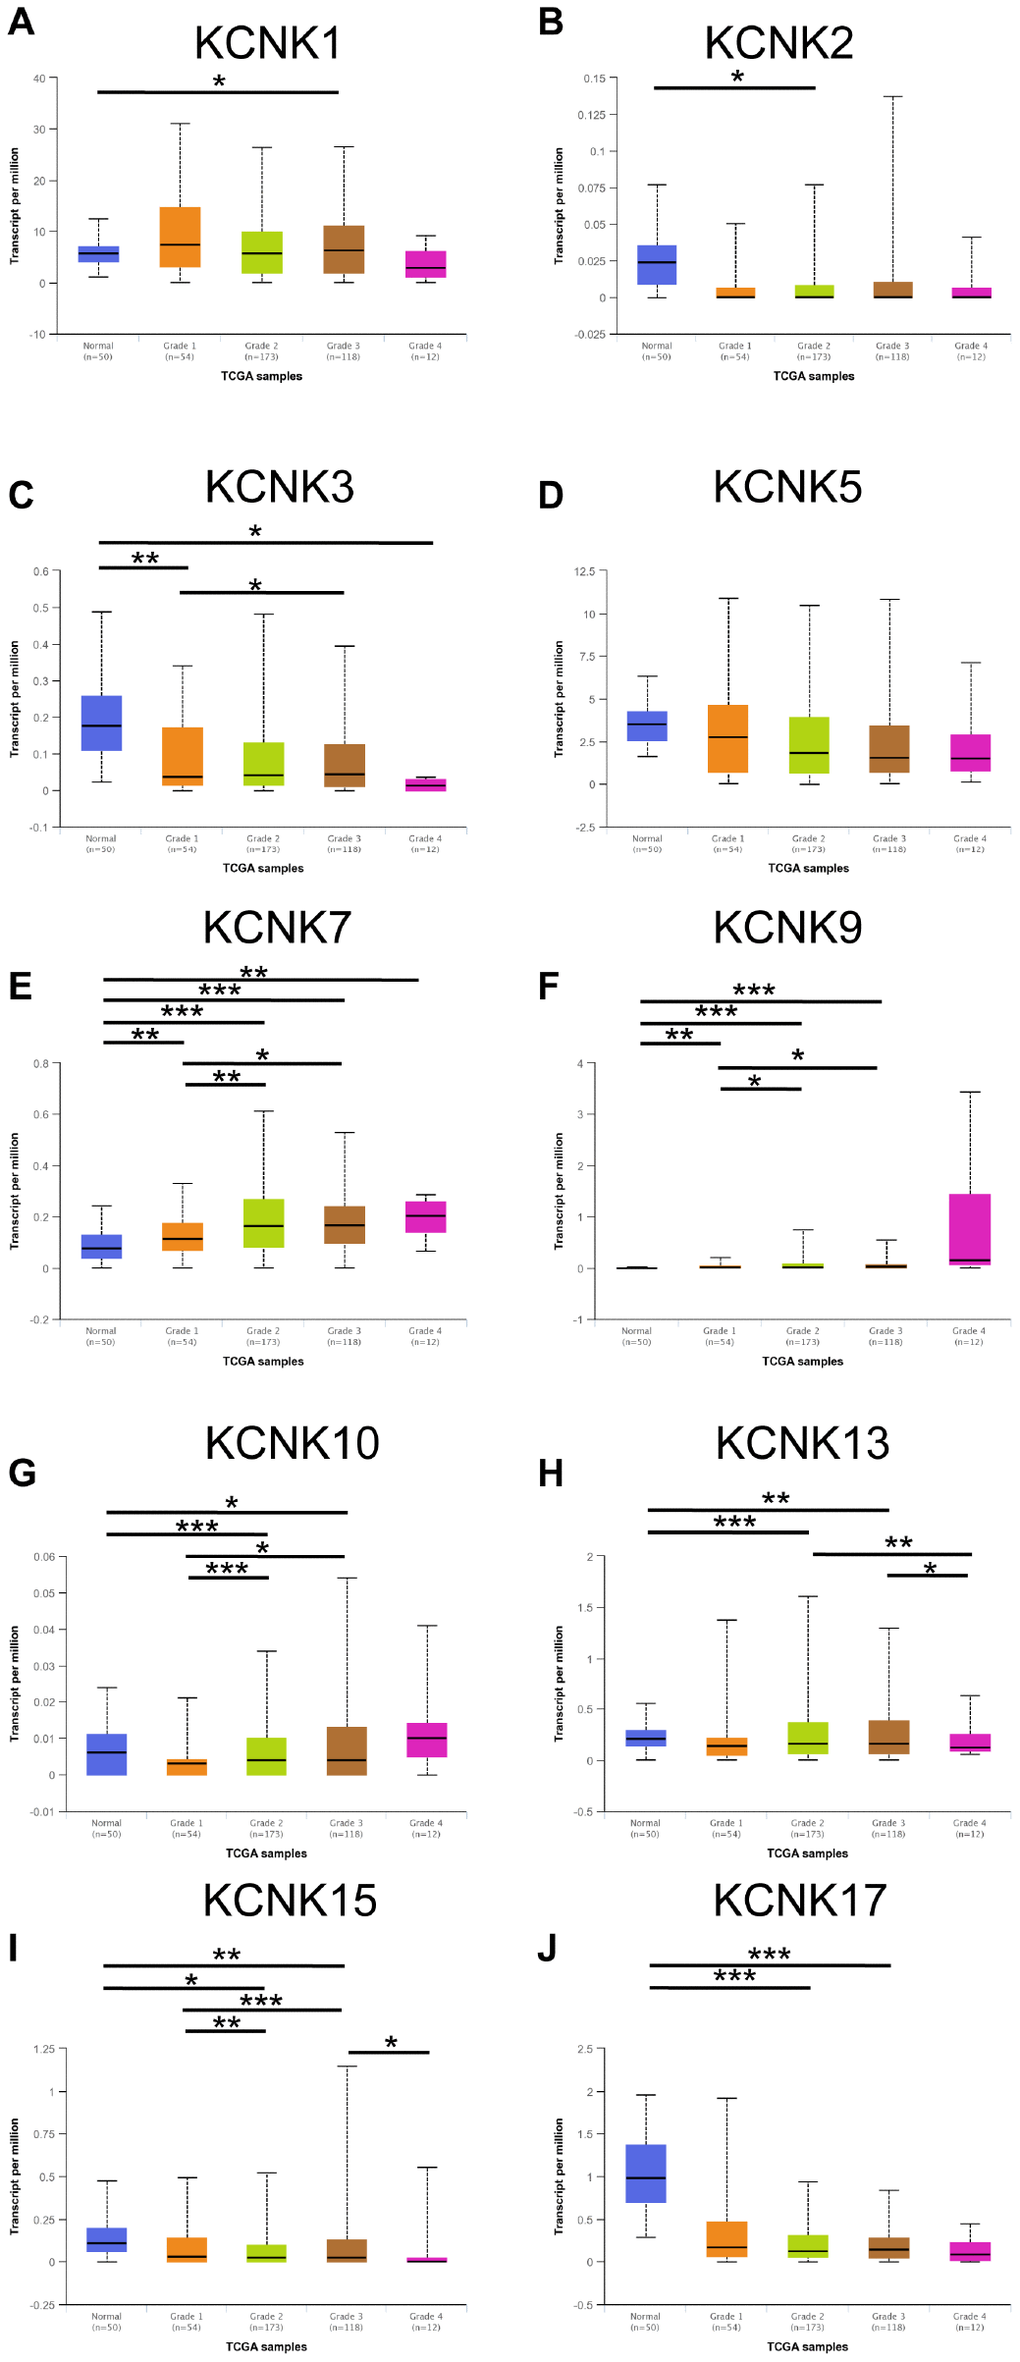 Correlation between levels of 10 KCNKs and HCC patient clinicopathological characteristics. The highest mRNA levels for KCNK7/9/10 were found in tumors of grade 4 (E, F, G) while the lowest mRNA levels of KCNK3/13/15/17 were found in grade 4 tumors (C, H, I, J). Expression of KCNK1/2/5 did not vary with tumor grade (A, B, D). *p